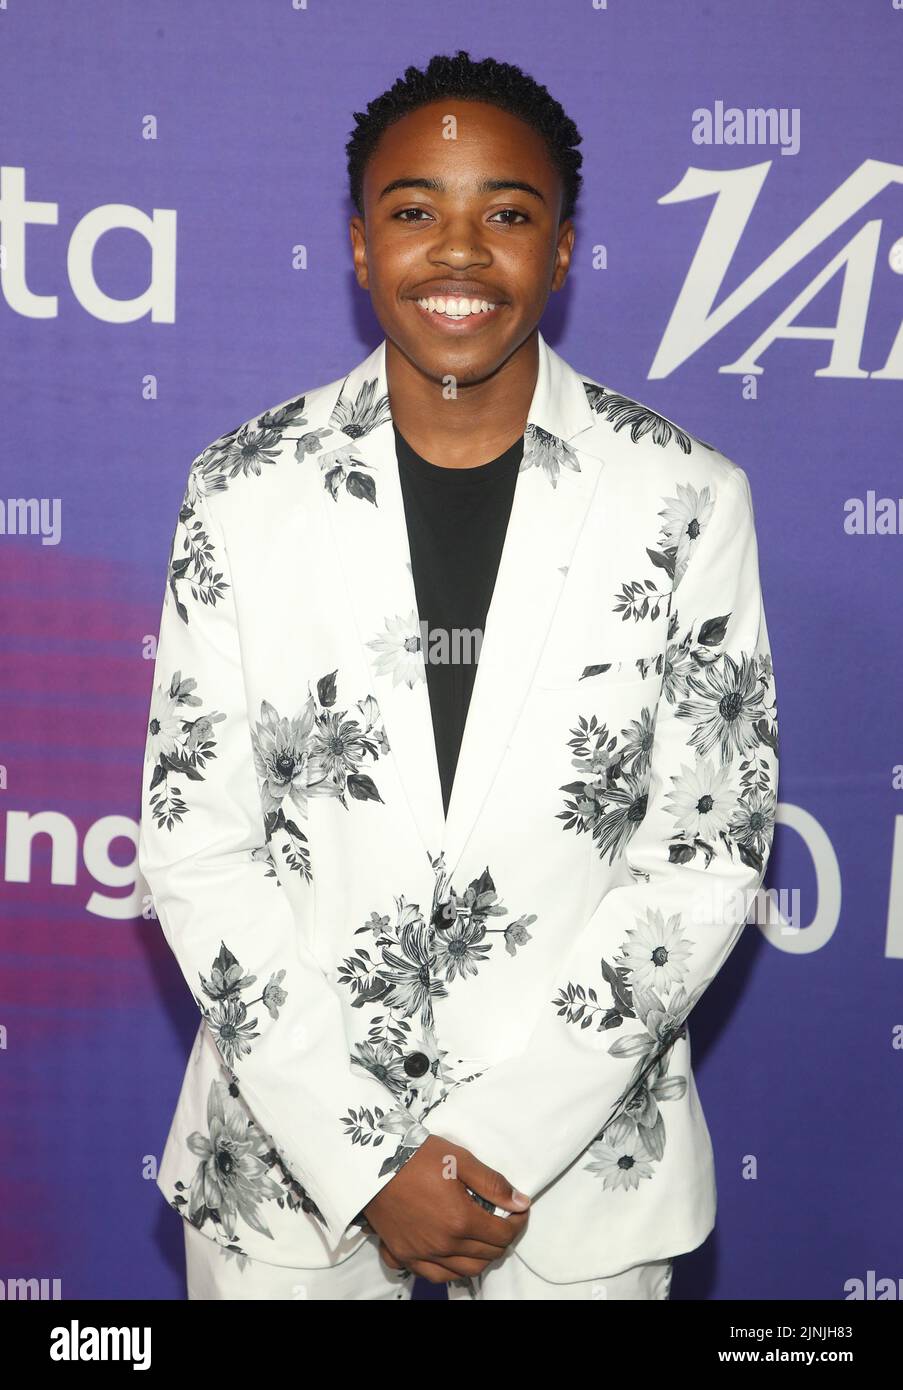 Los Angeles, California, USA. 11th Aug, 2022. Dallas Dupree Young. Variety's 2022 Power Of Young Hollywood Celebration Presented By Facebook Gaming held at Neuehouse Hollywood in Los Angeles. Credit: AdMedia Photo via/Newscom/Alamy Live News Stock Photo